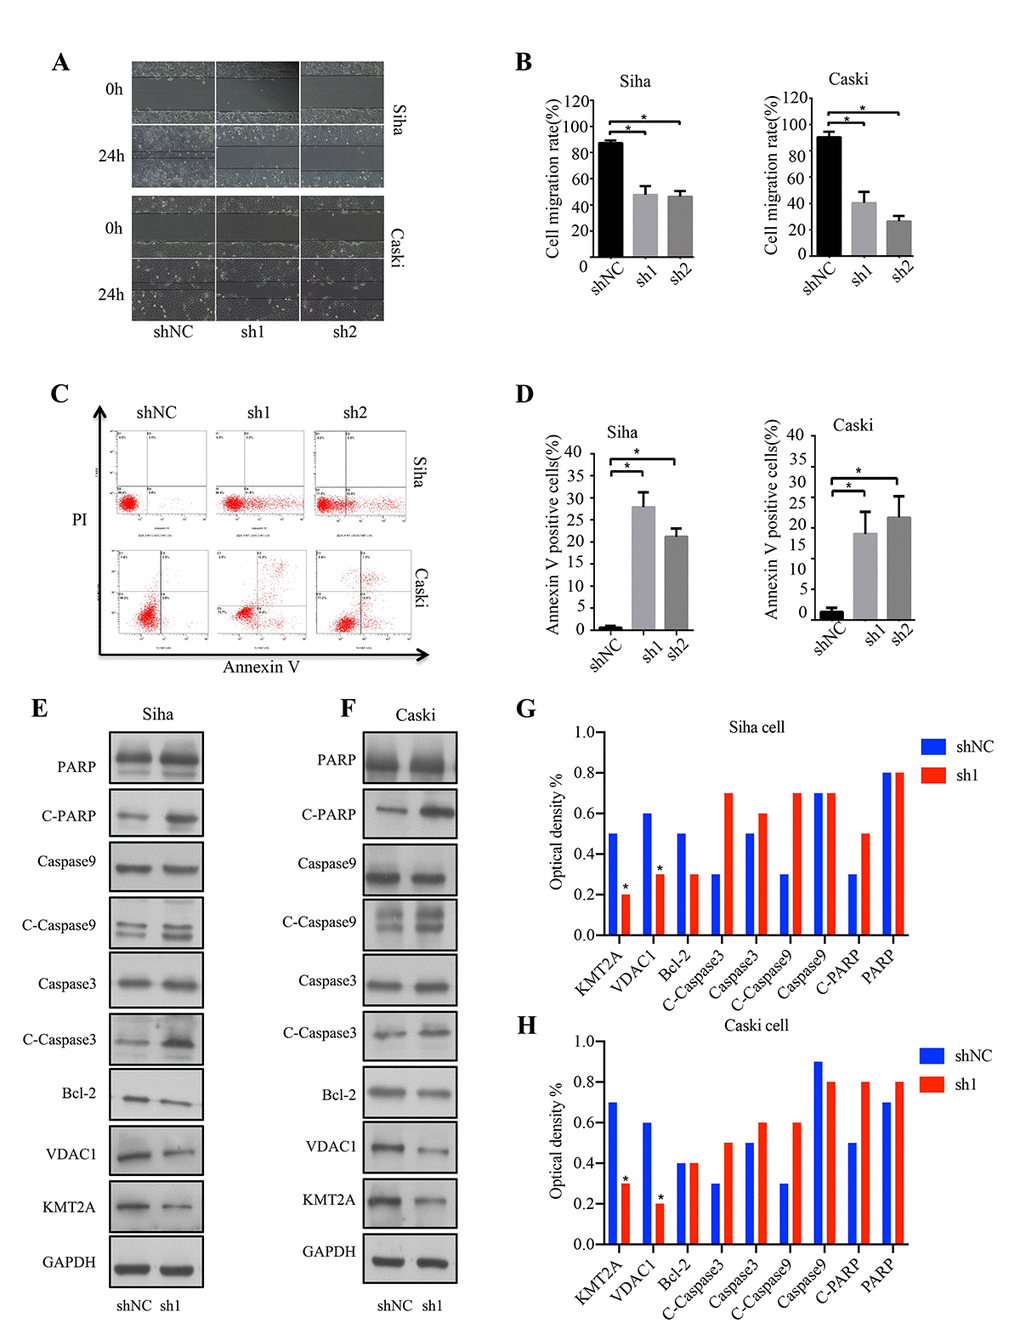 KMT2A knockdown suppressed cell migration and induced apoptosis in cervical cancer cells. (A) The migration ability of Siha and Caski cells was measured by wound-healing assay. (B) The cell migration rate %. (C) Apoptosis of Siha and Caski cells was detected by FACS analysis. (D) Annexin V positive cells %. (E and F) The expression of proteins was detected by Western blot in Siha and Caski cells with KMT2A knockdown. (G and H) The average value of Figure E and F.